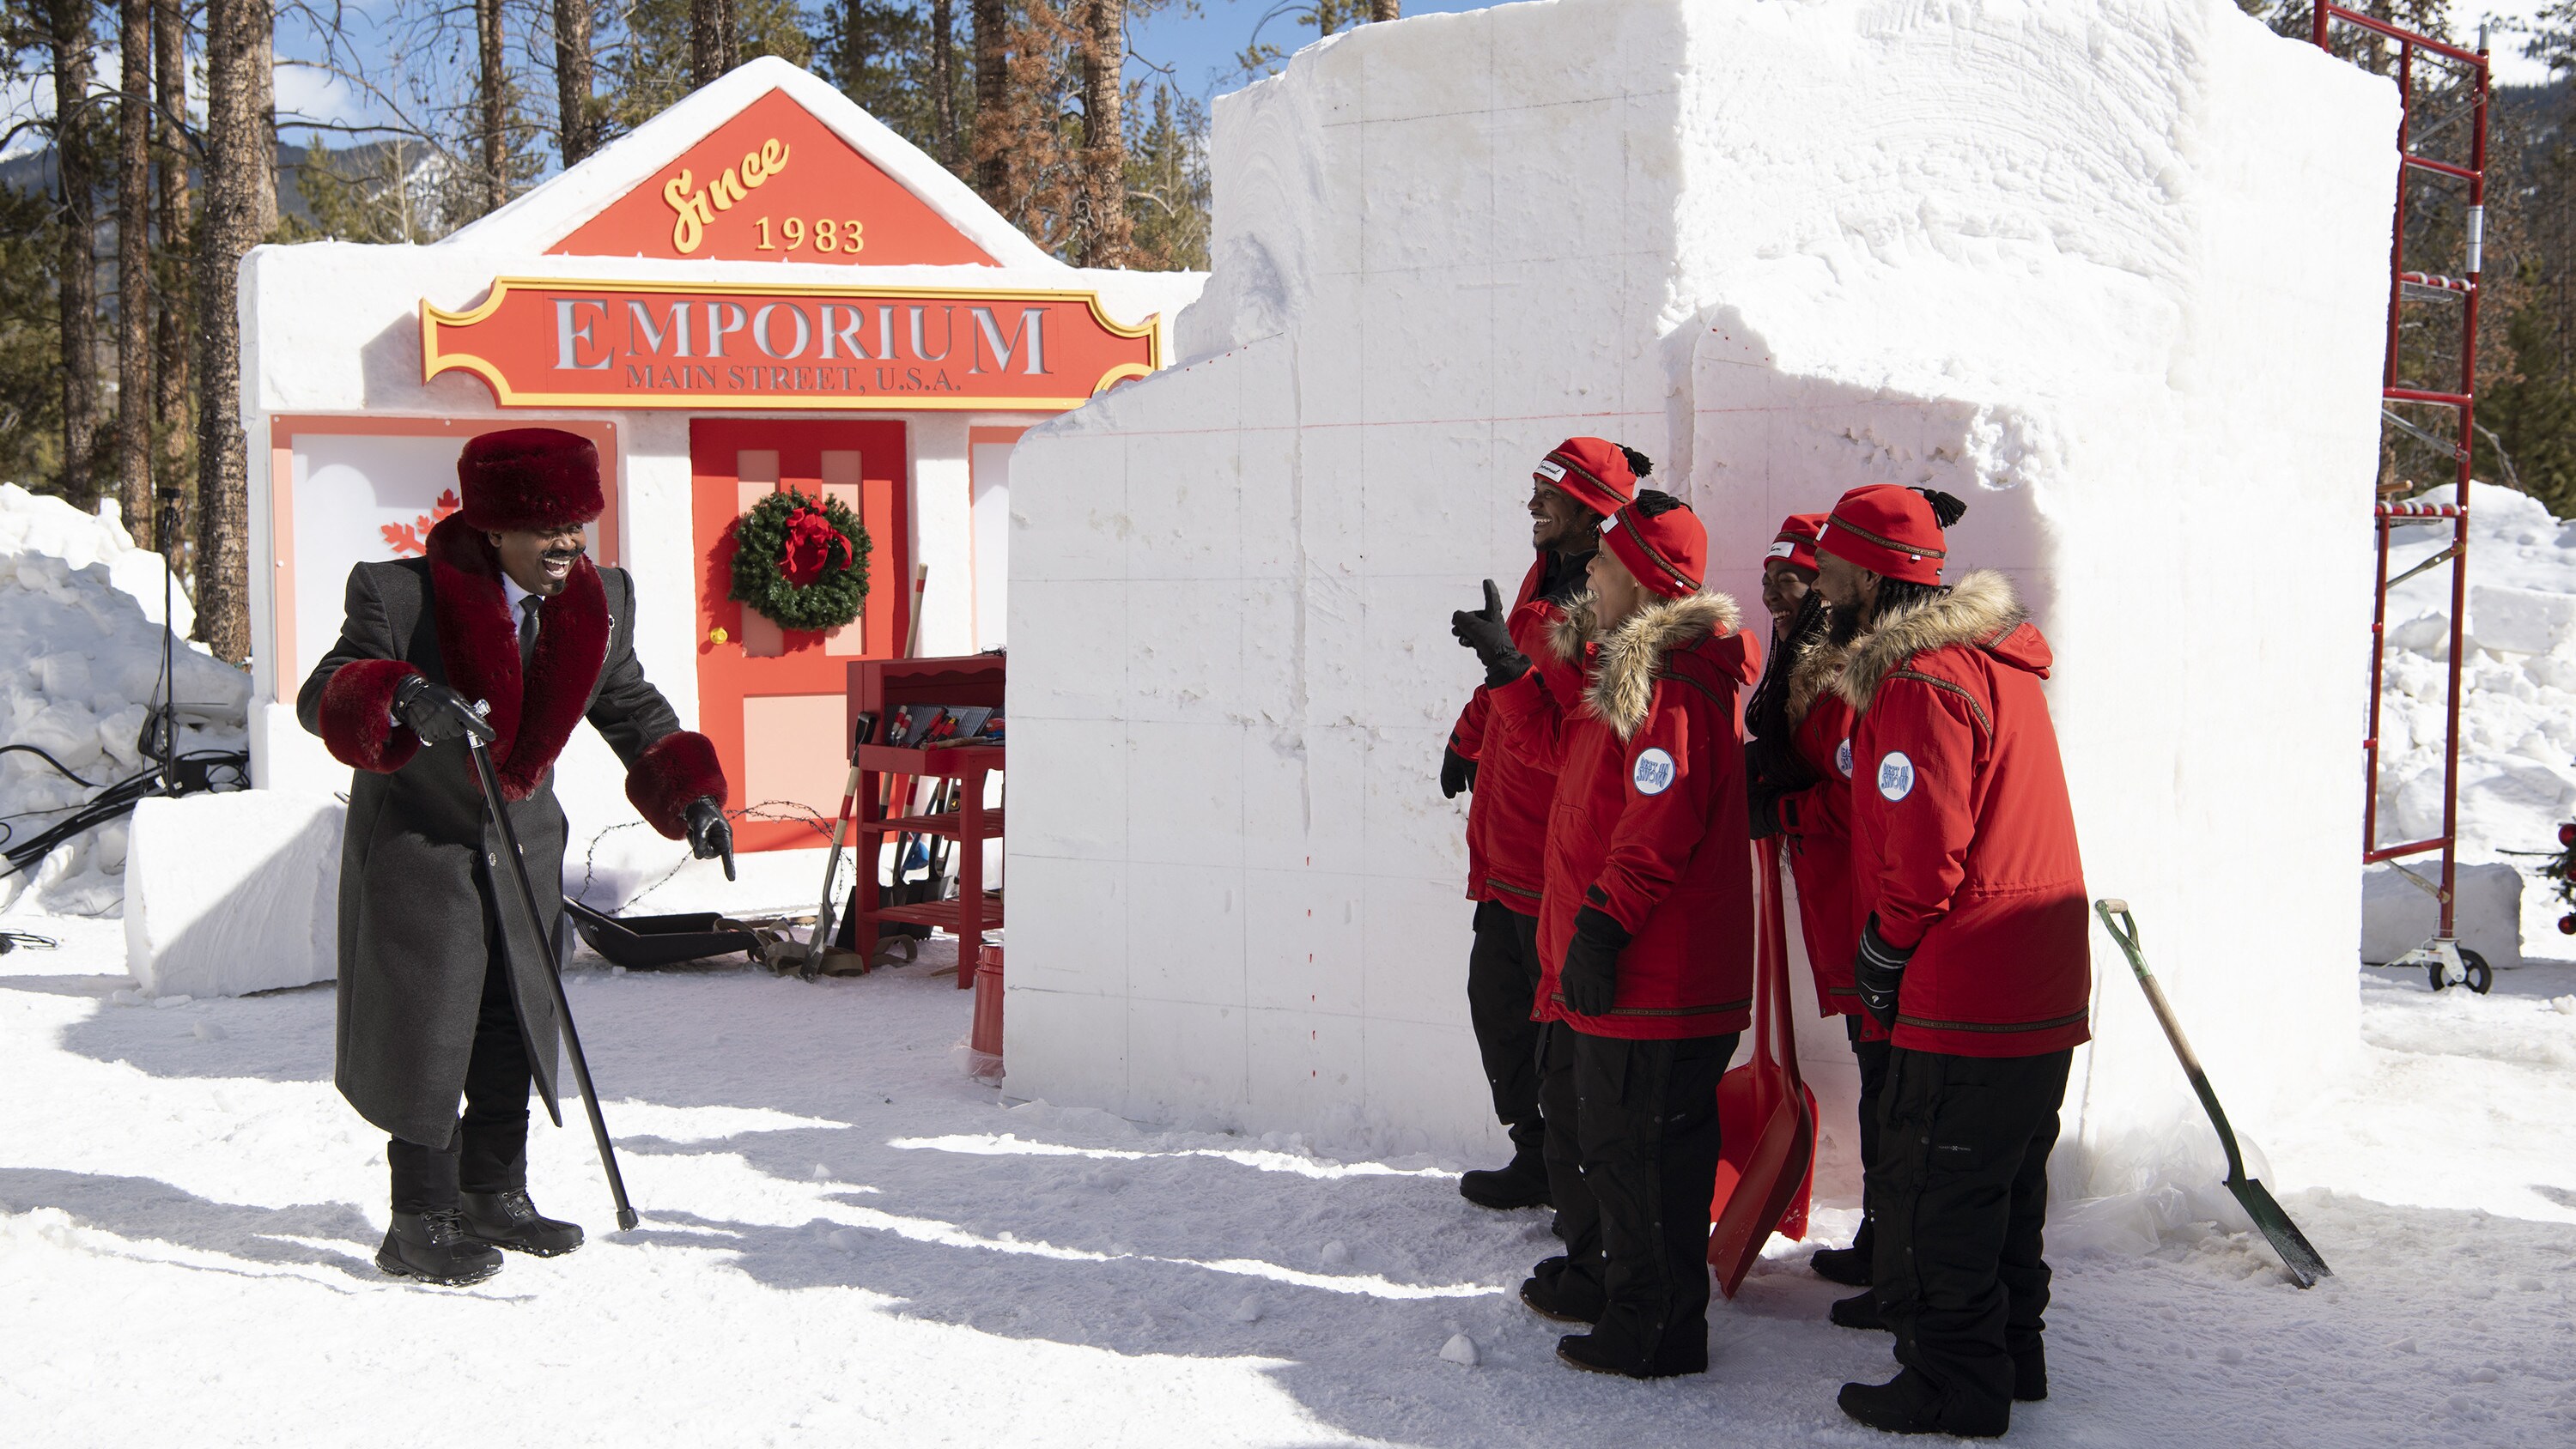 BEST IN SNOW. Host, Tituss Burgess, speaks to the carving team, Hakuna Matata/Southern Snow. (Disney/Todd Wawrychuk)